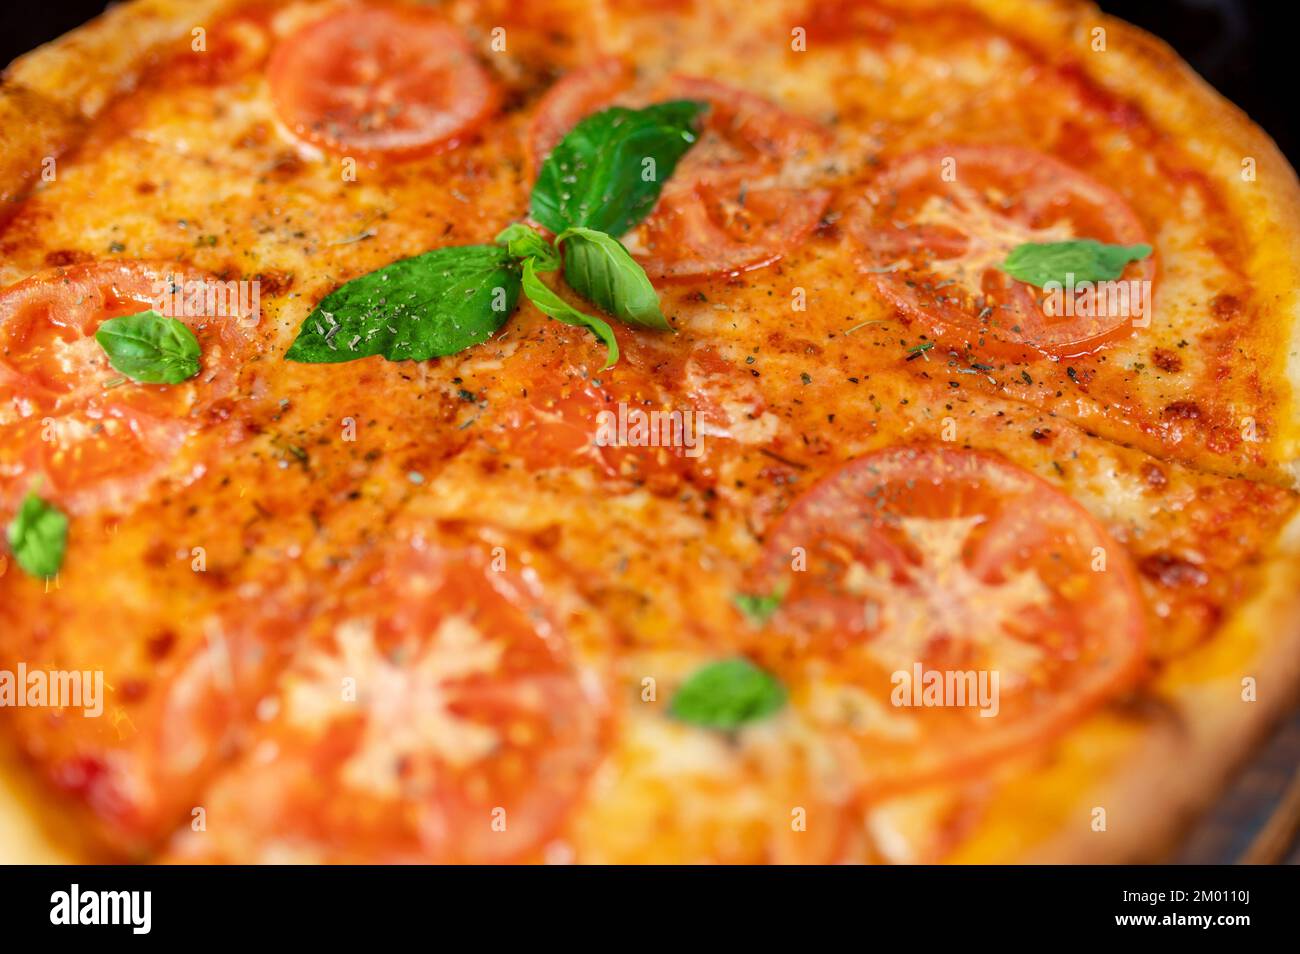 Italian pizza. An appetizing pizza with vegetarian topping. Stock Photo